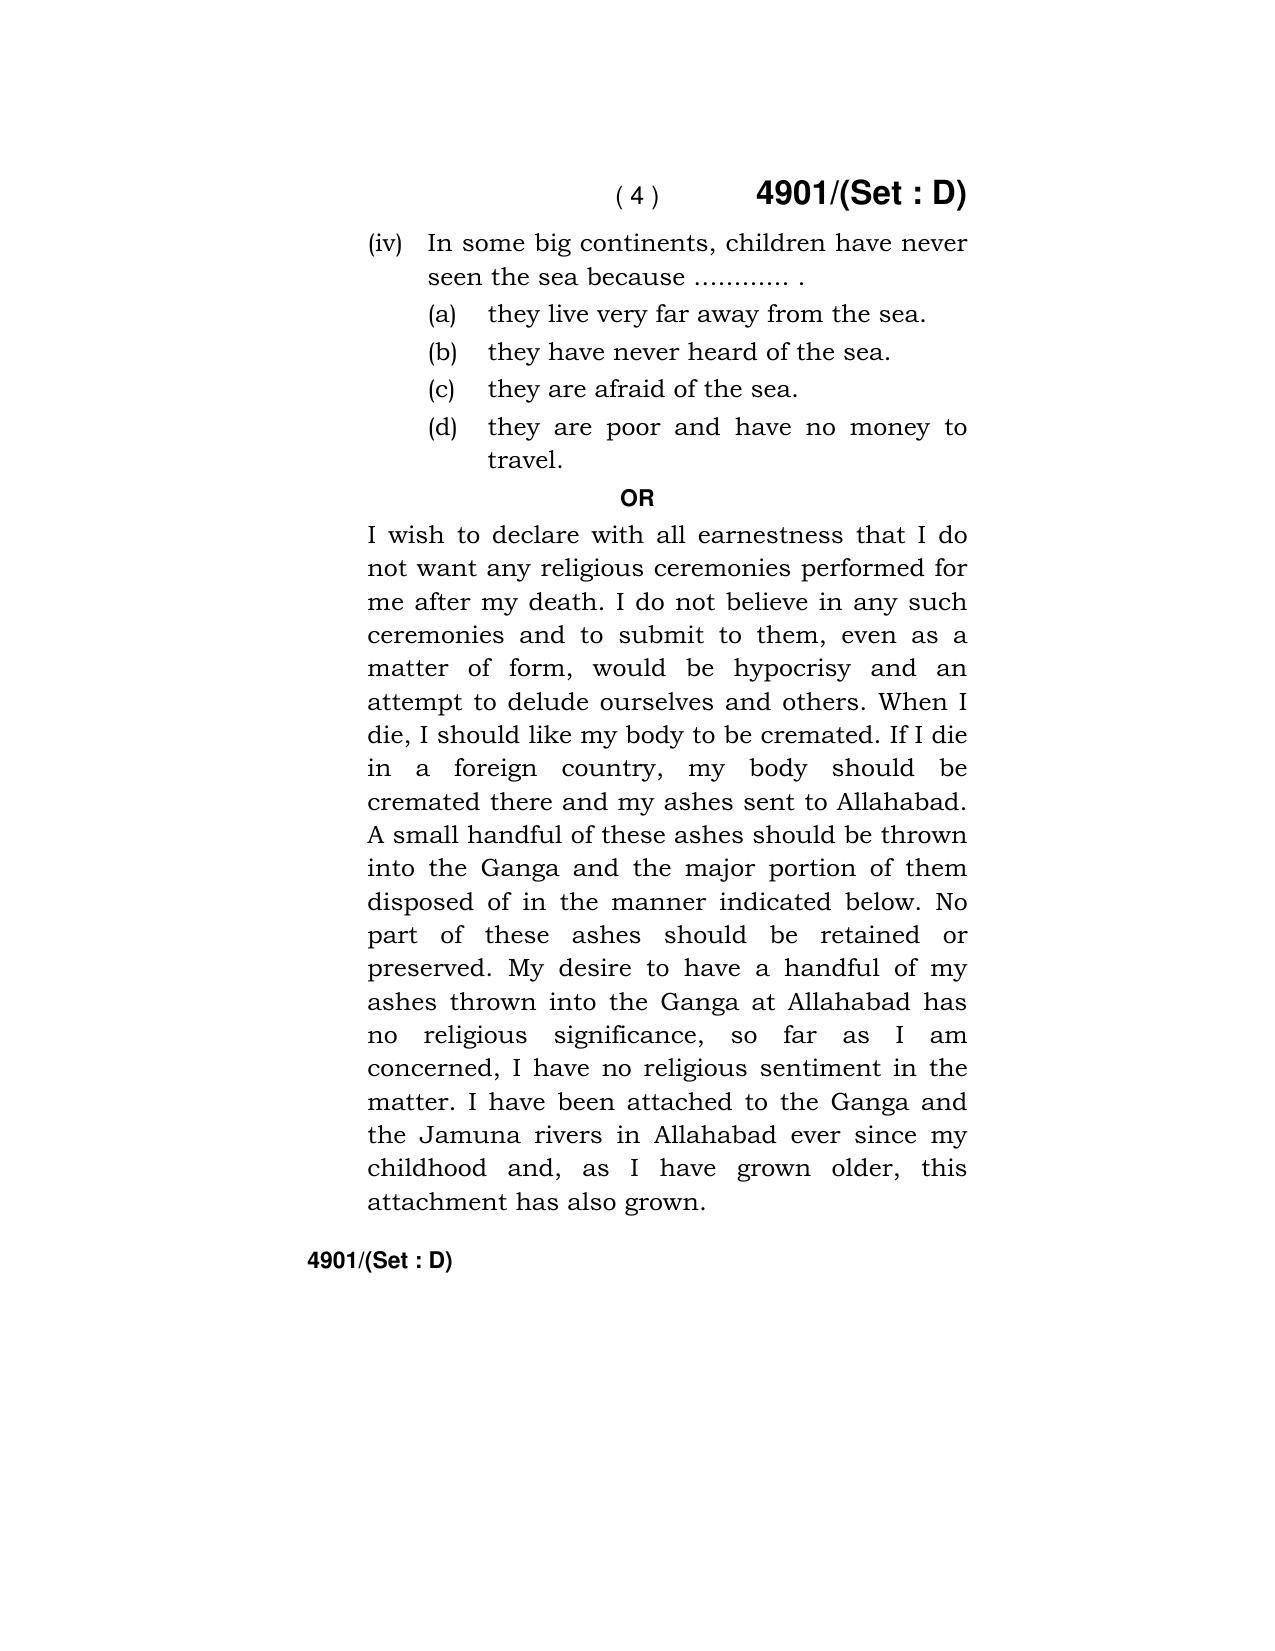 Haryana Board HBSE Class 12 English Core 2020 Question Paper - Page 52